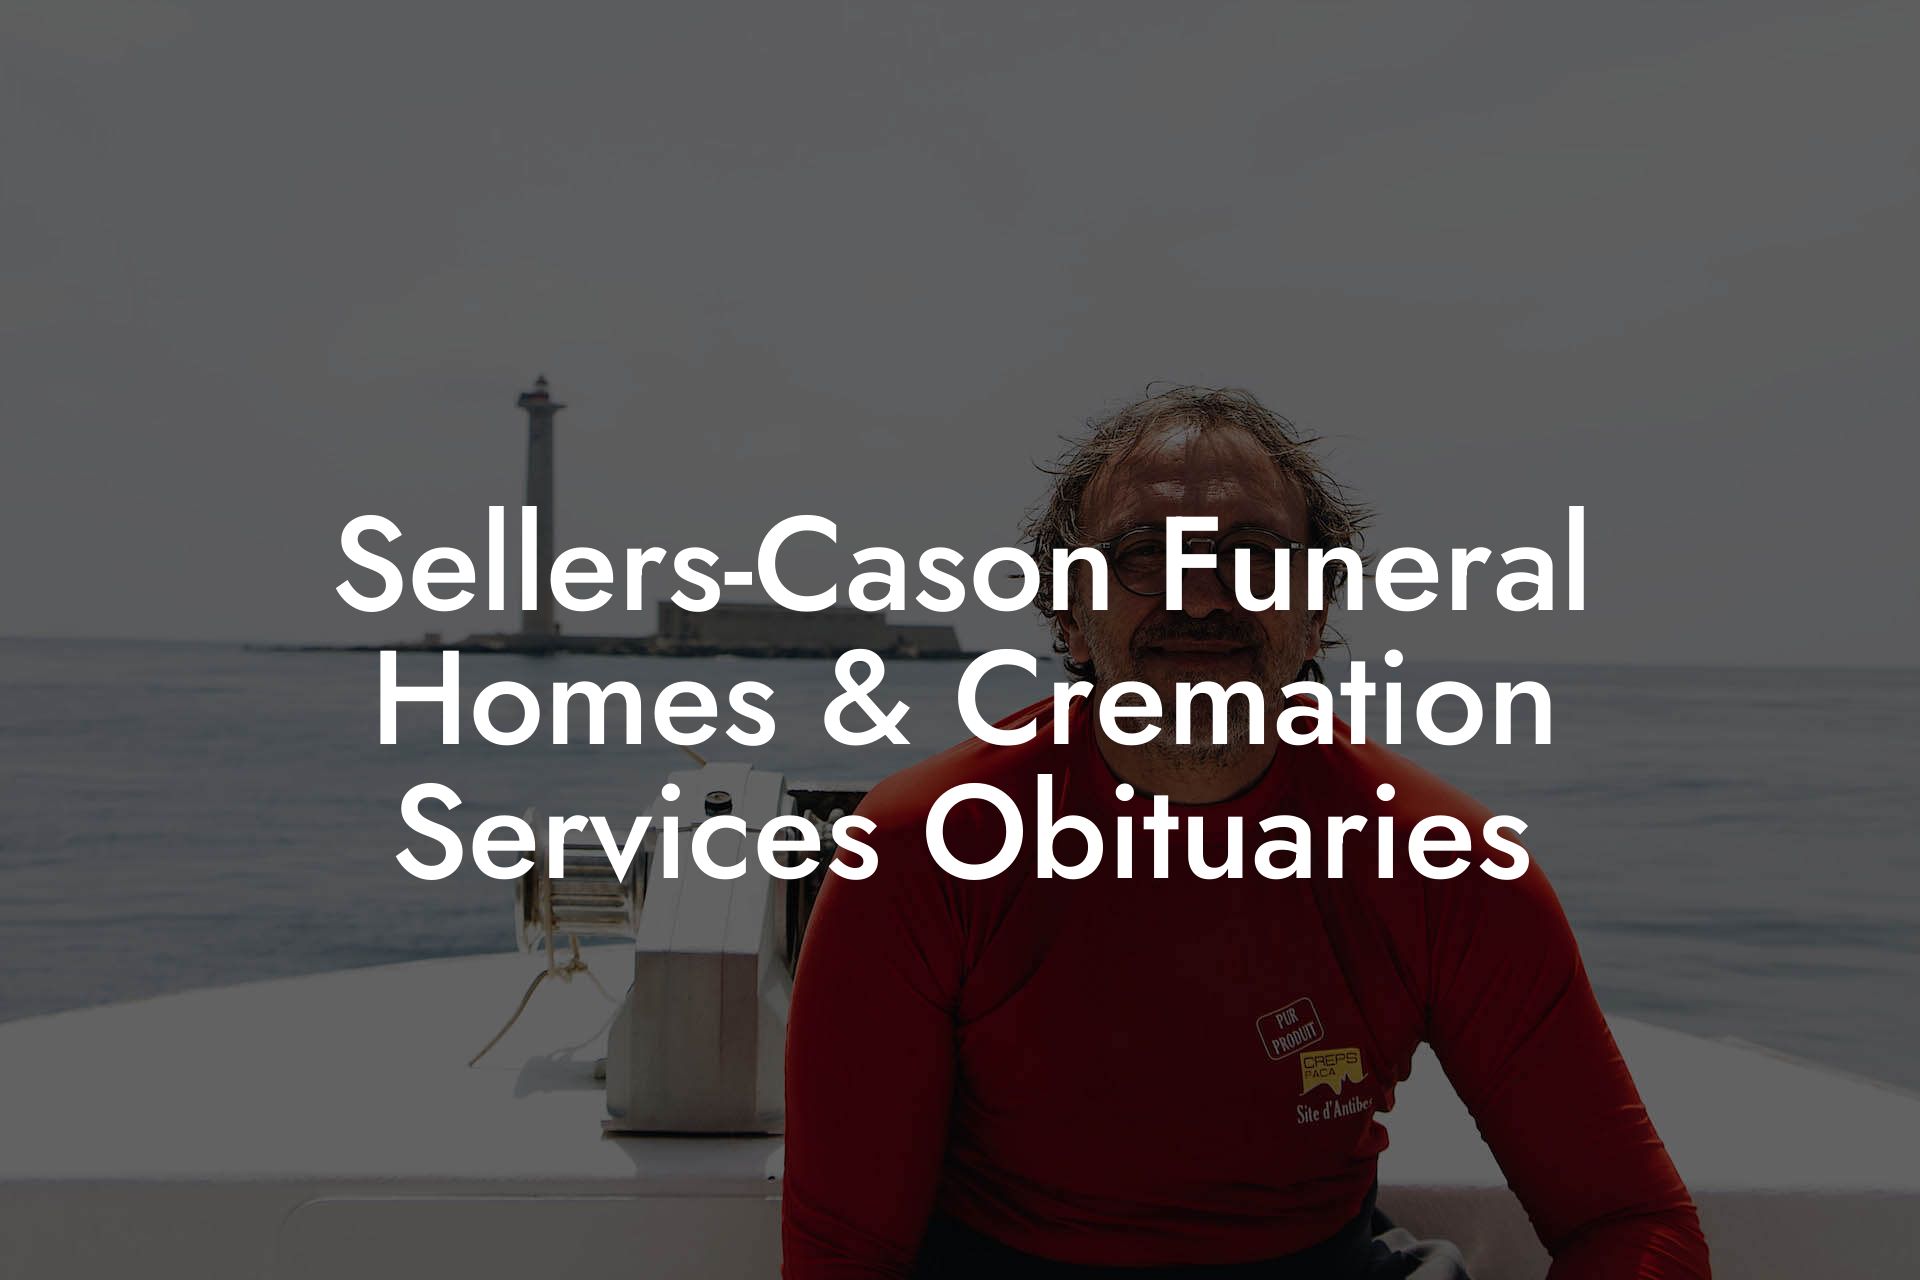 Sellers-Cason Funeral Homes & Cremation Services Obituaries